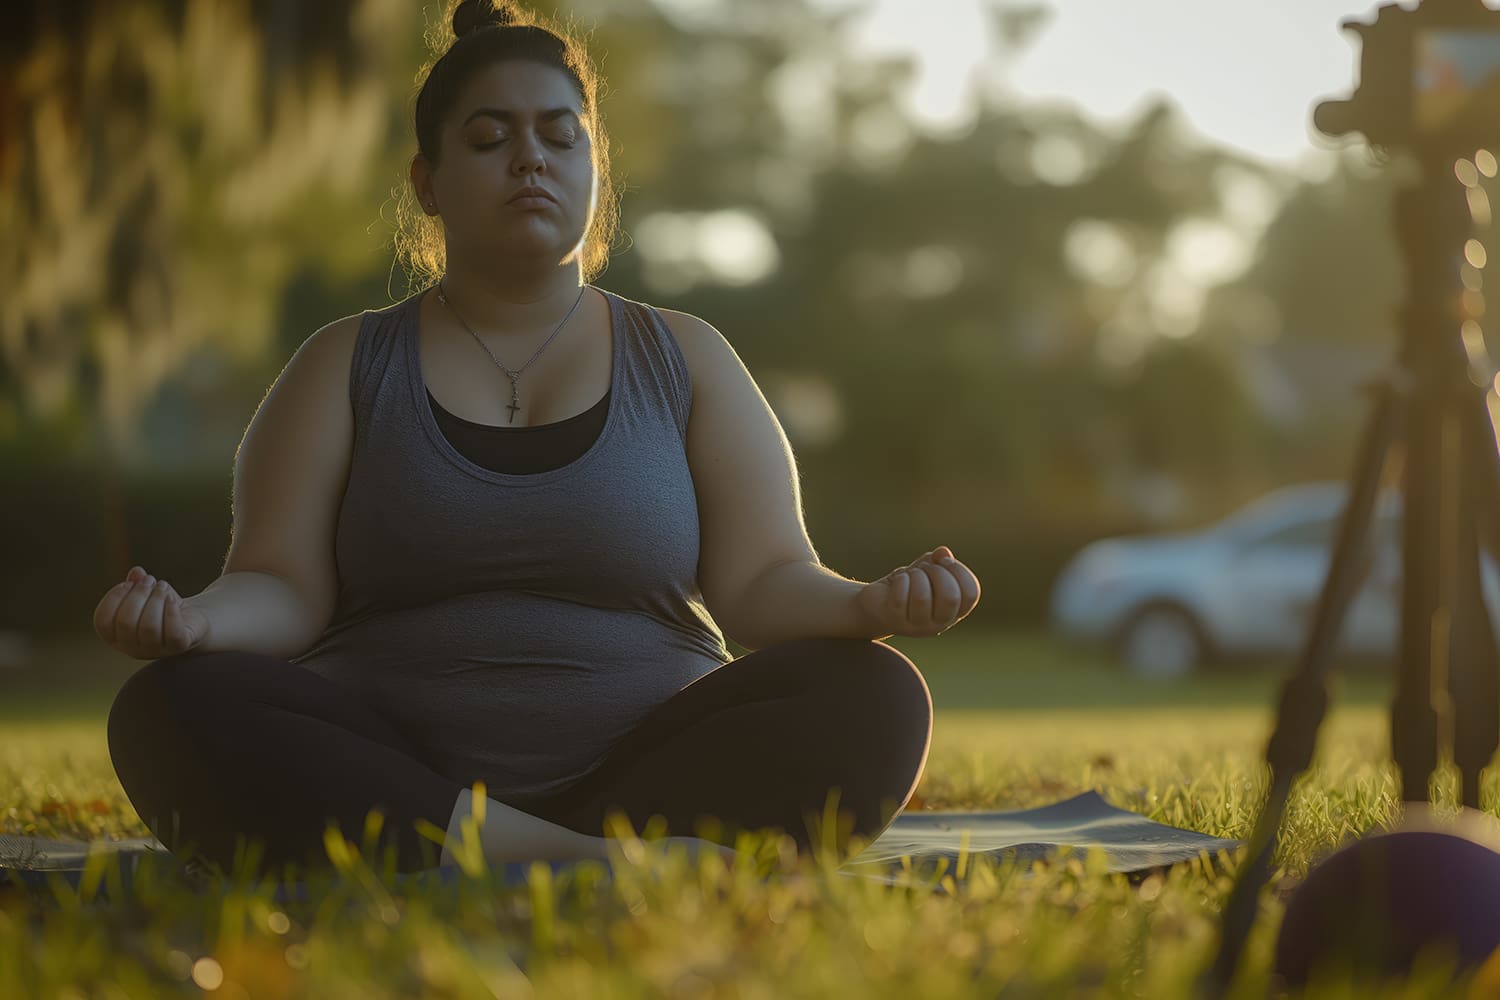 A person is meditating in a park during sunset, sitting cross-legged on a yoga mat with eyes closed and hands resting on the knees. In the background are trees and a parked car. A tripod is set up in front of the person to document their journey towards achieving their ideal body through mindful practice.